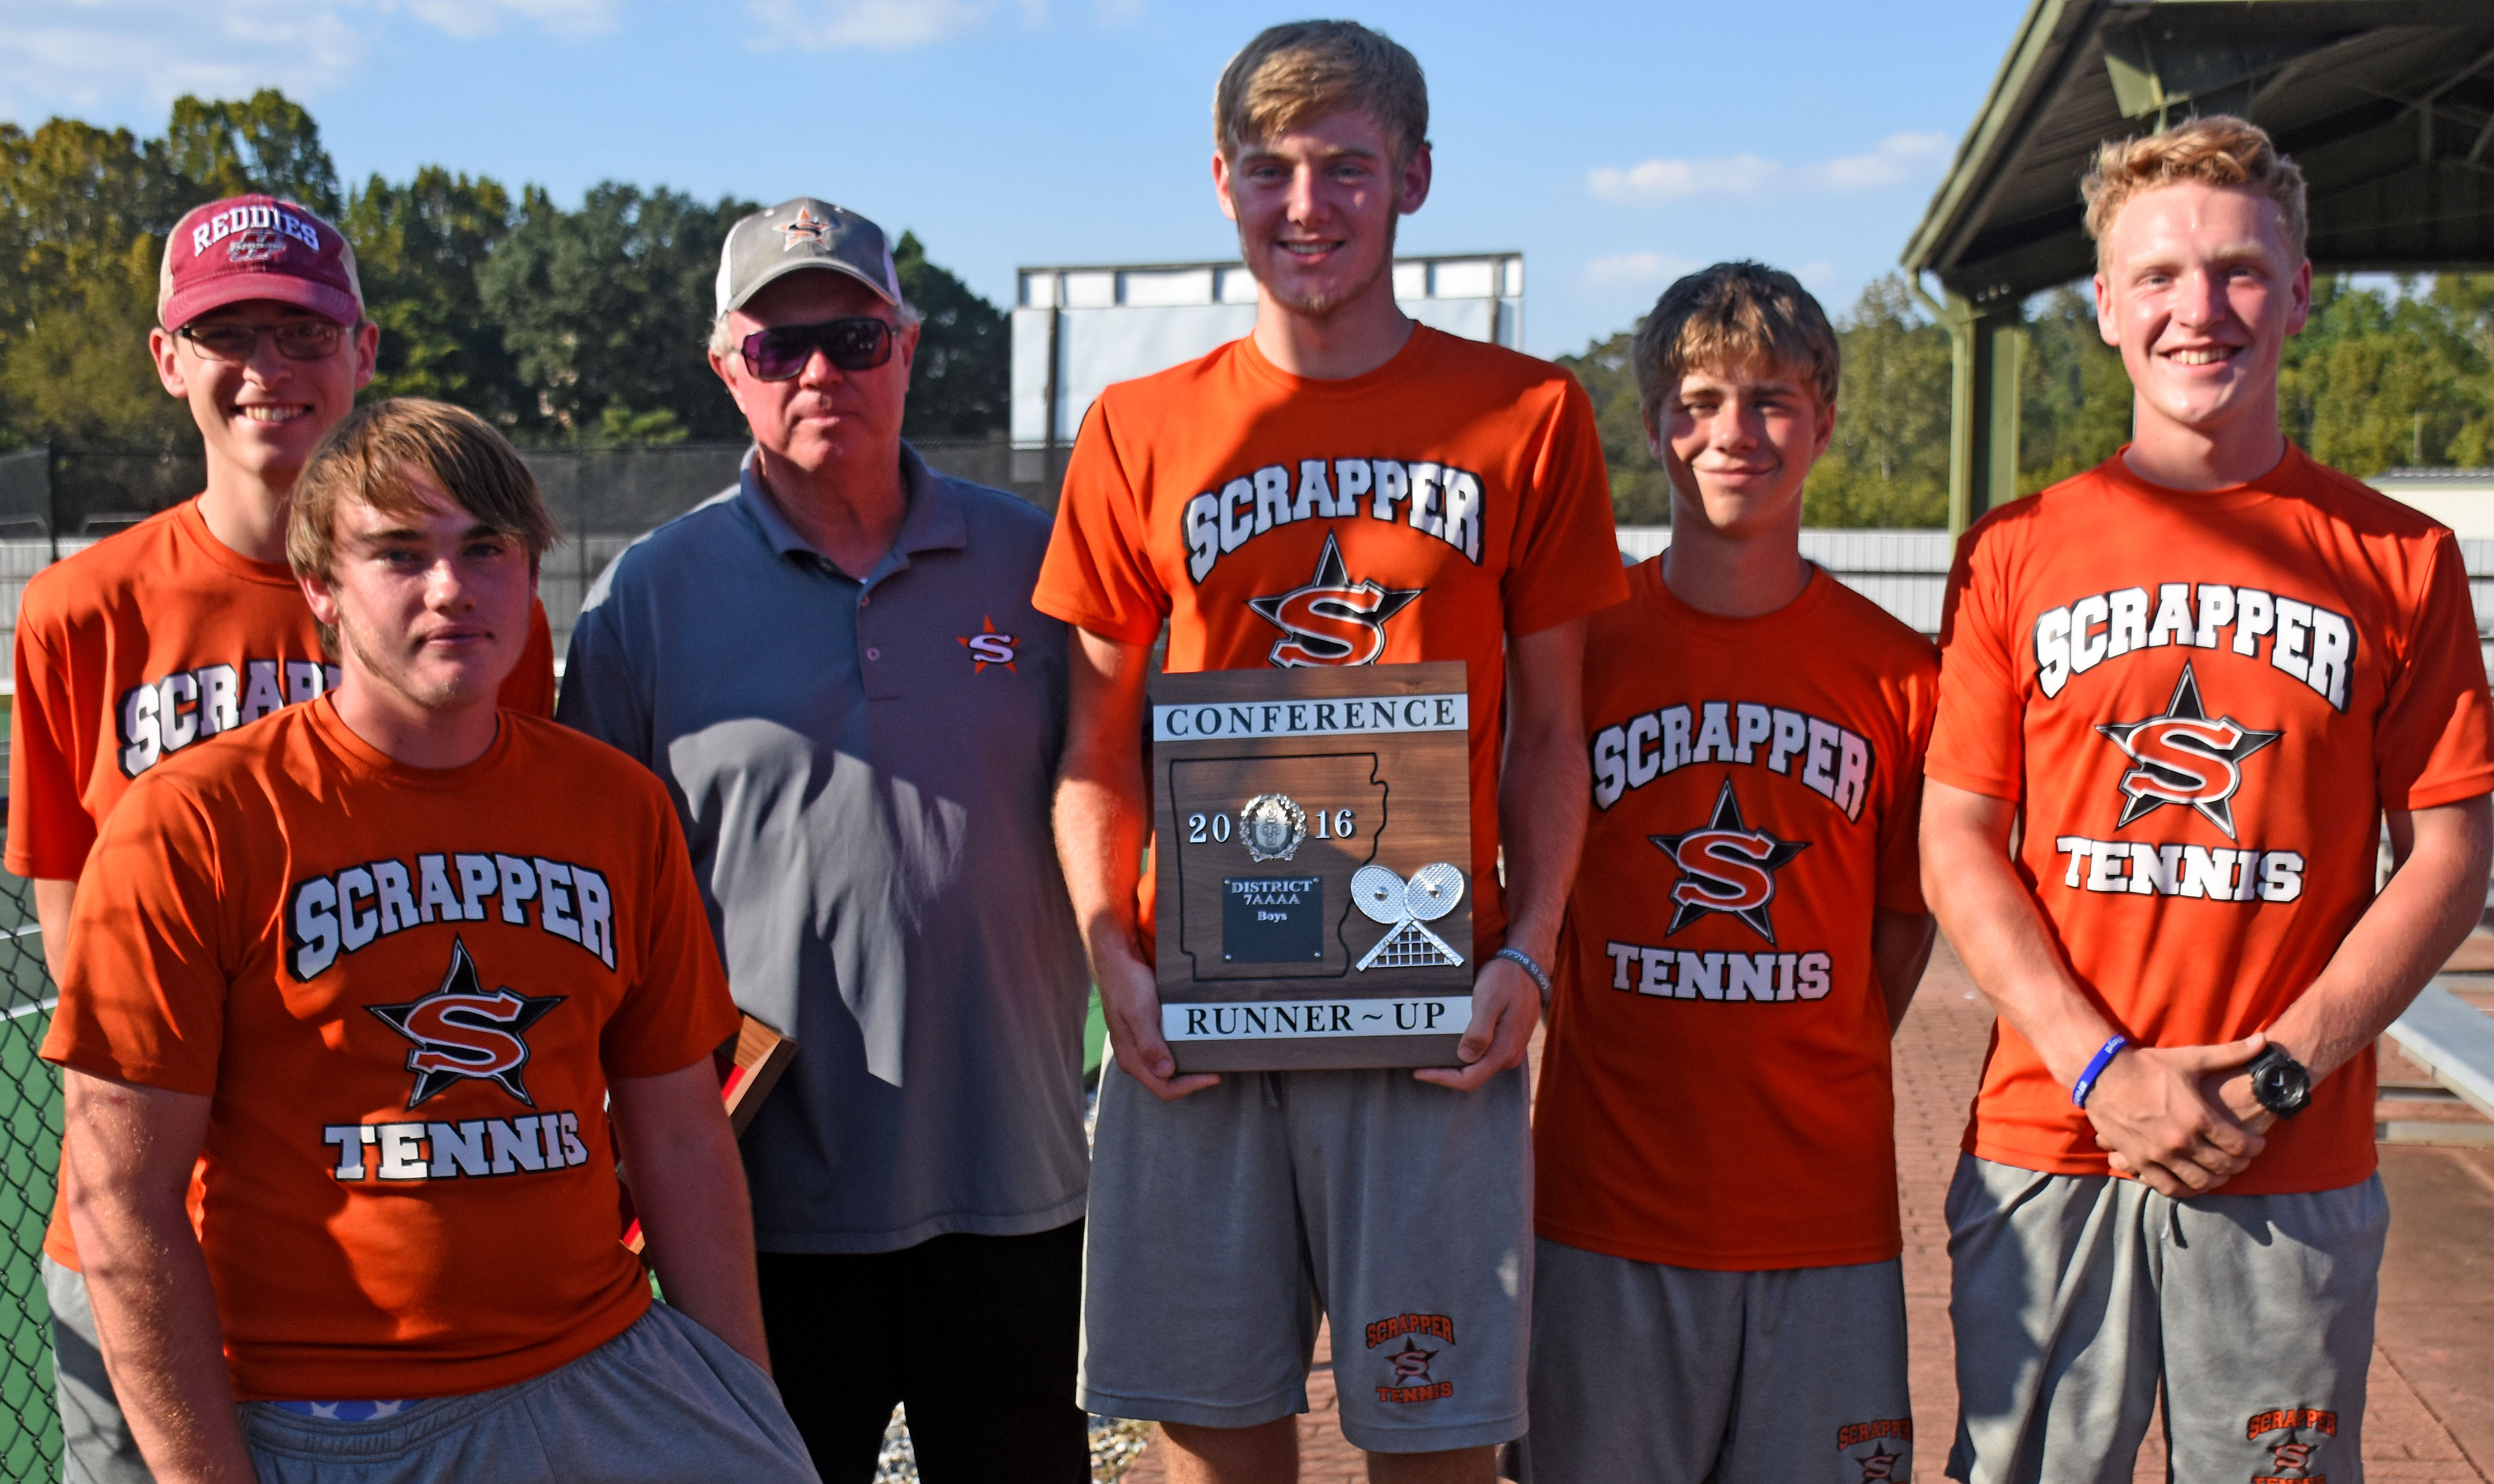 The Scrapper tennis team finished in the runner-up position at the District 7-4A tournament Monday. The team includes Eli Howard, Zach Backus, Coach Damon Williams, Glenn Hartness, Caleb Newton and Zach Williams. Hartness and Backus won the district doubles championship.